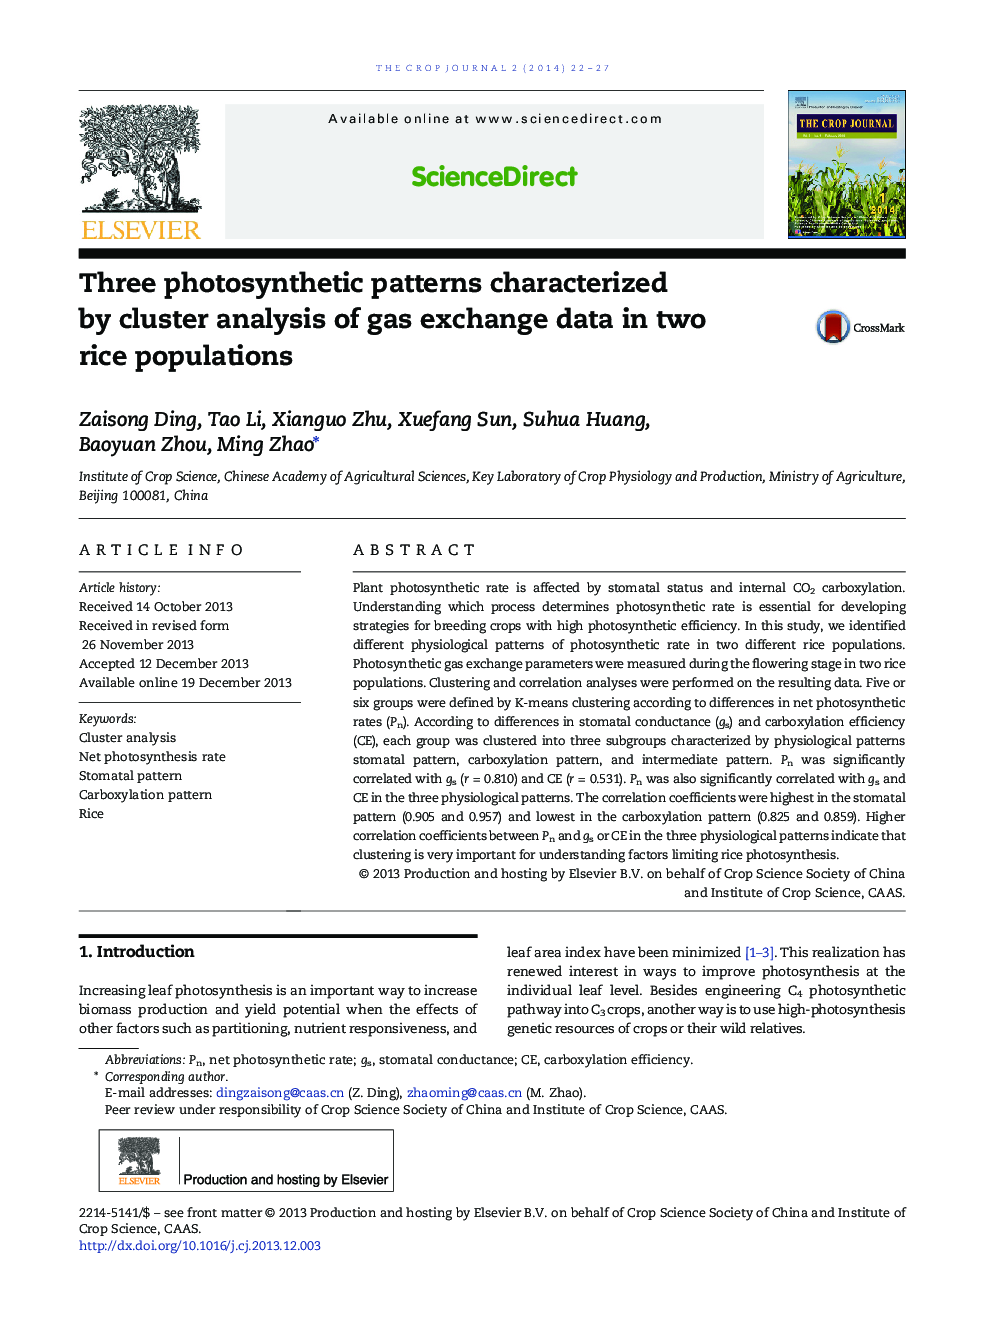 Three photosynthetic patterns characterized by cluster analysis of gas exchange data in two rice populations 